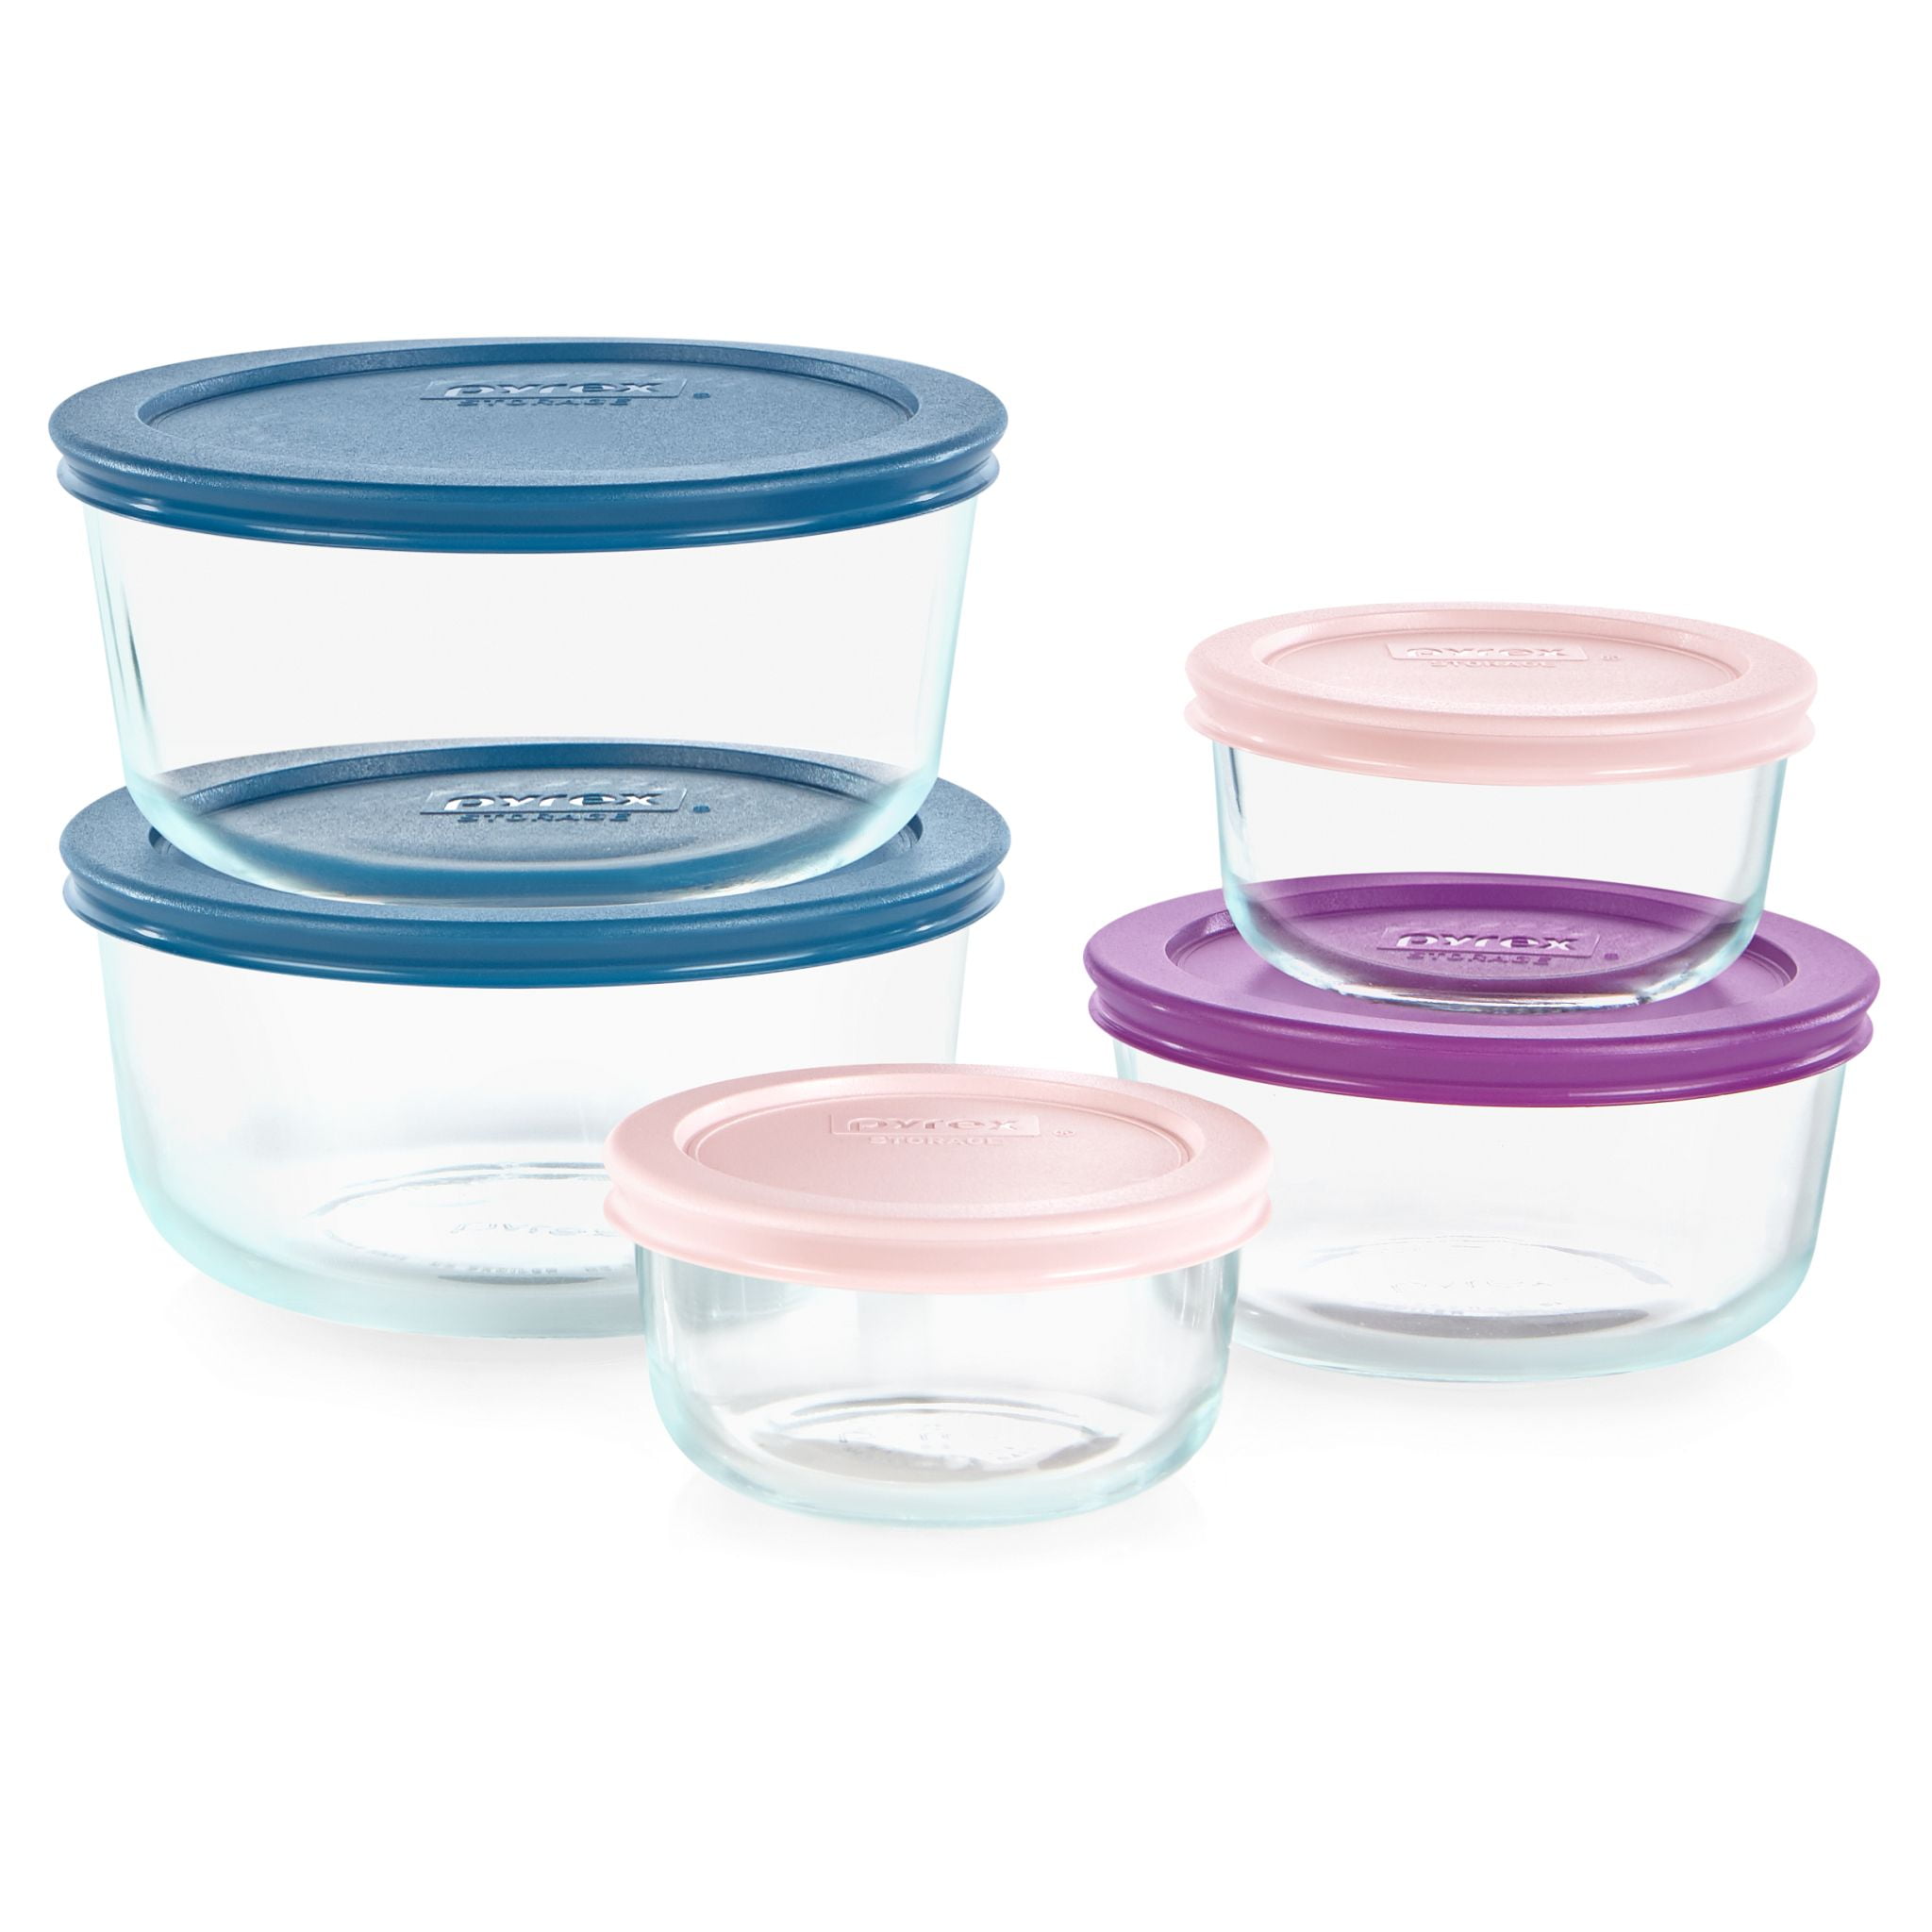 Pyrex 10-Piece Glass Food Storage Container Set with Round